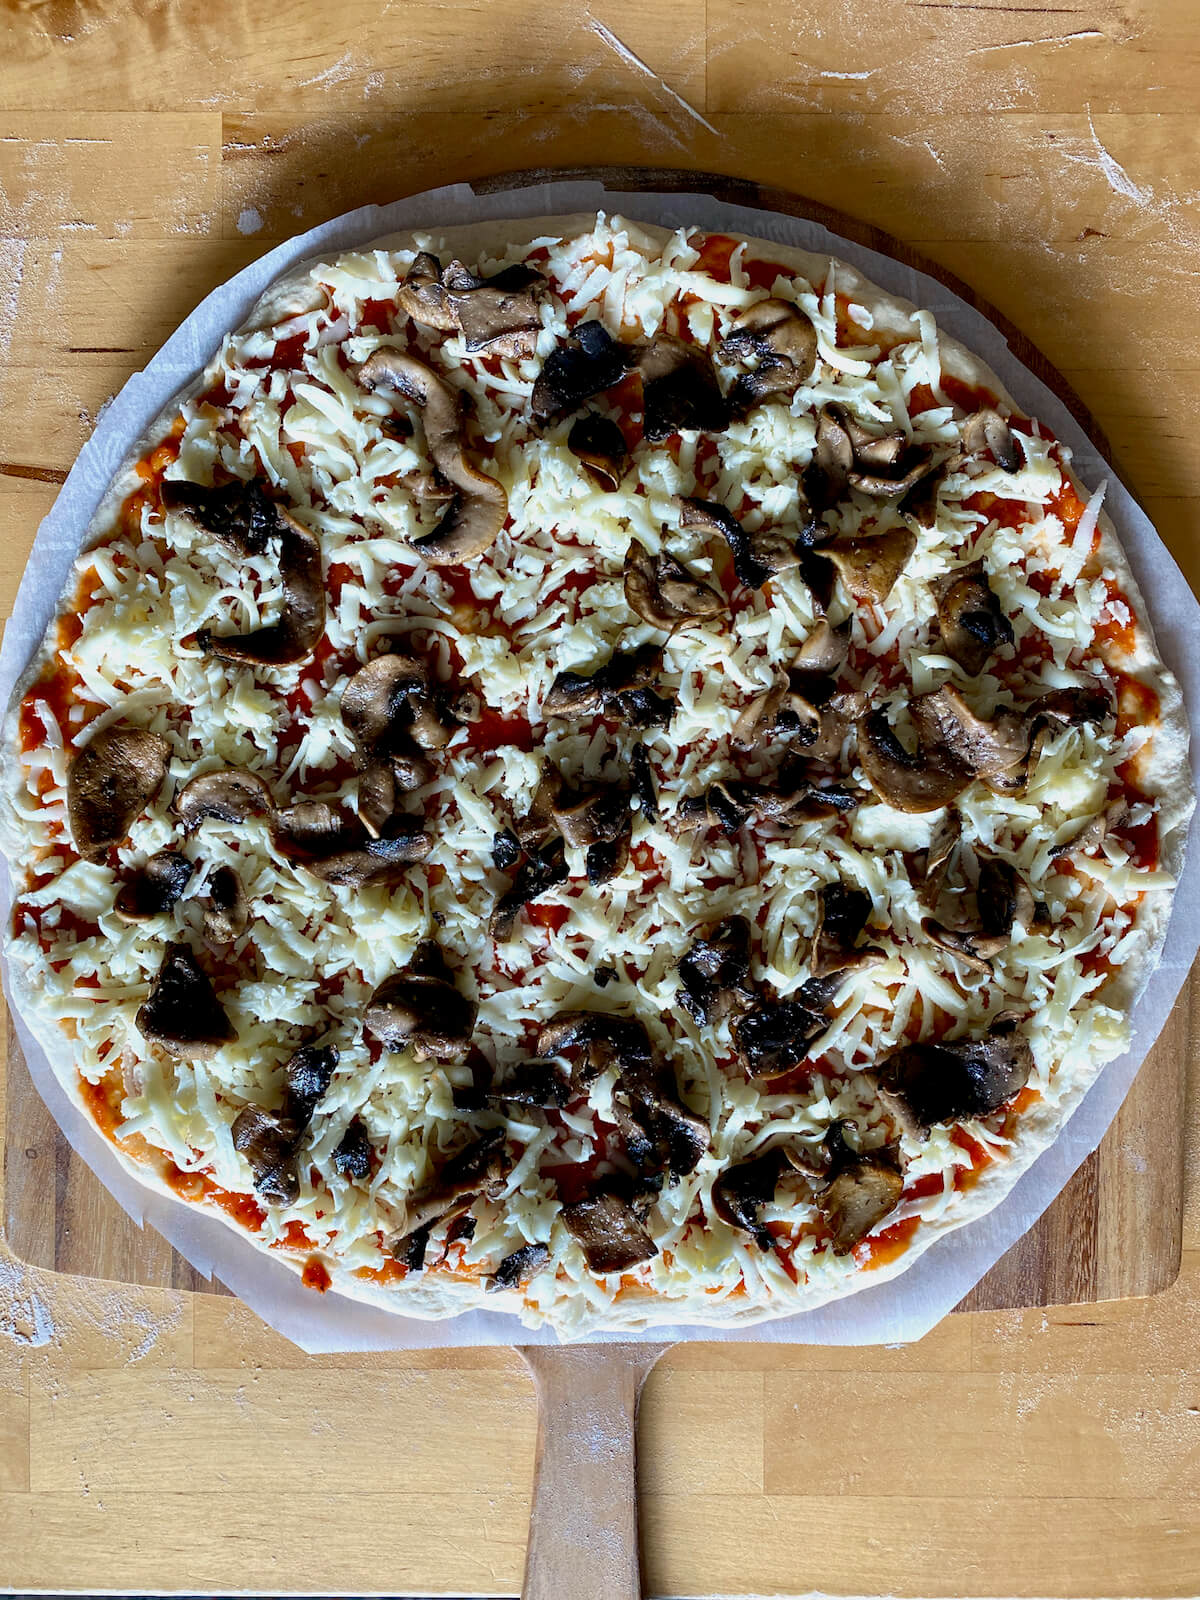 An assembled mushroom pizza on a pizza peel ready to be baked.